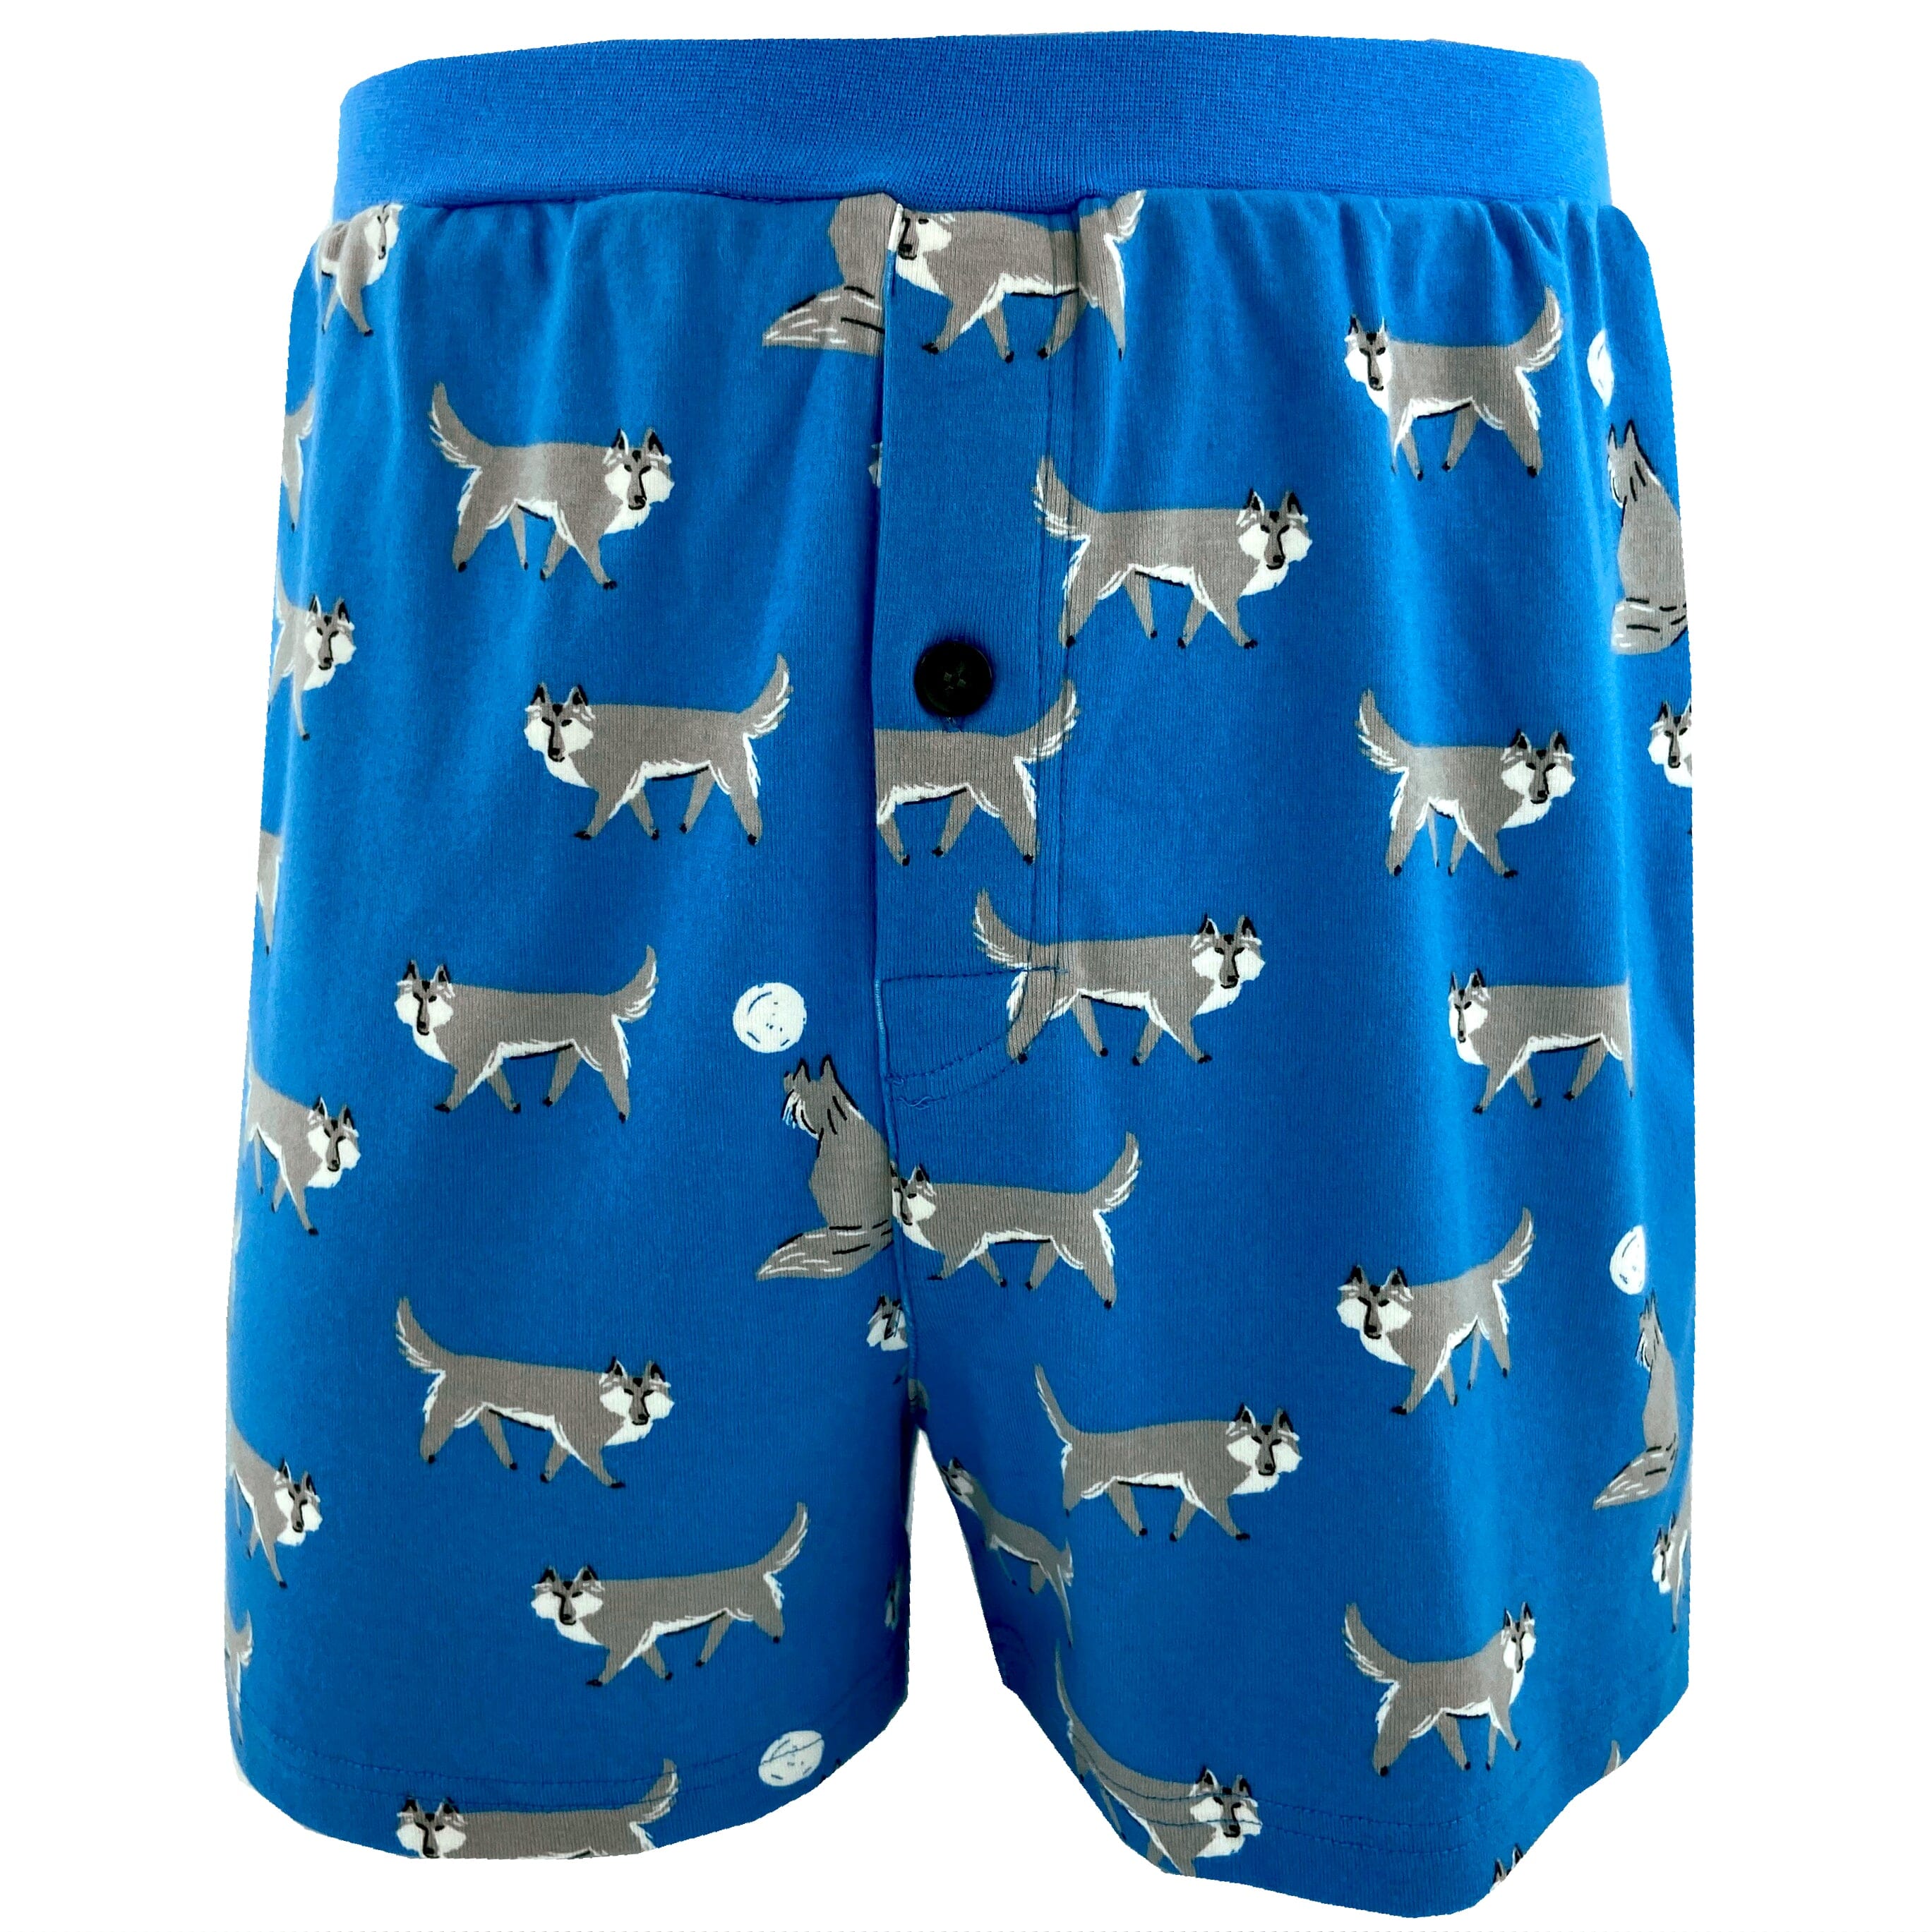 Men's Grey Wolves All Over Print Soft Cotton Knit Boxer Pajama Shorts